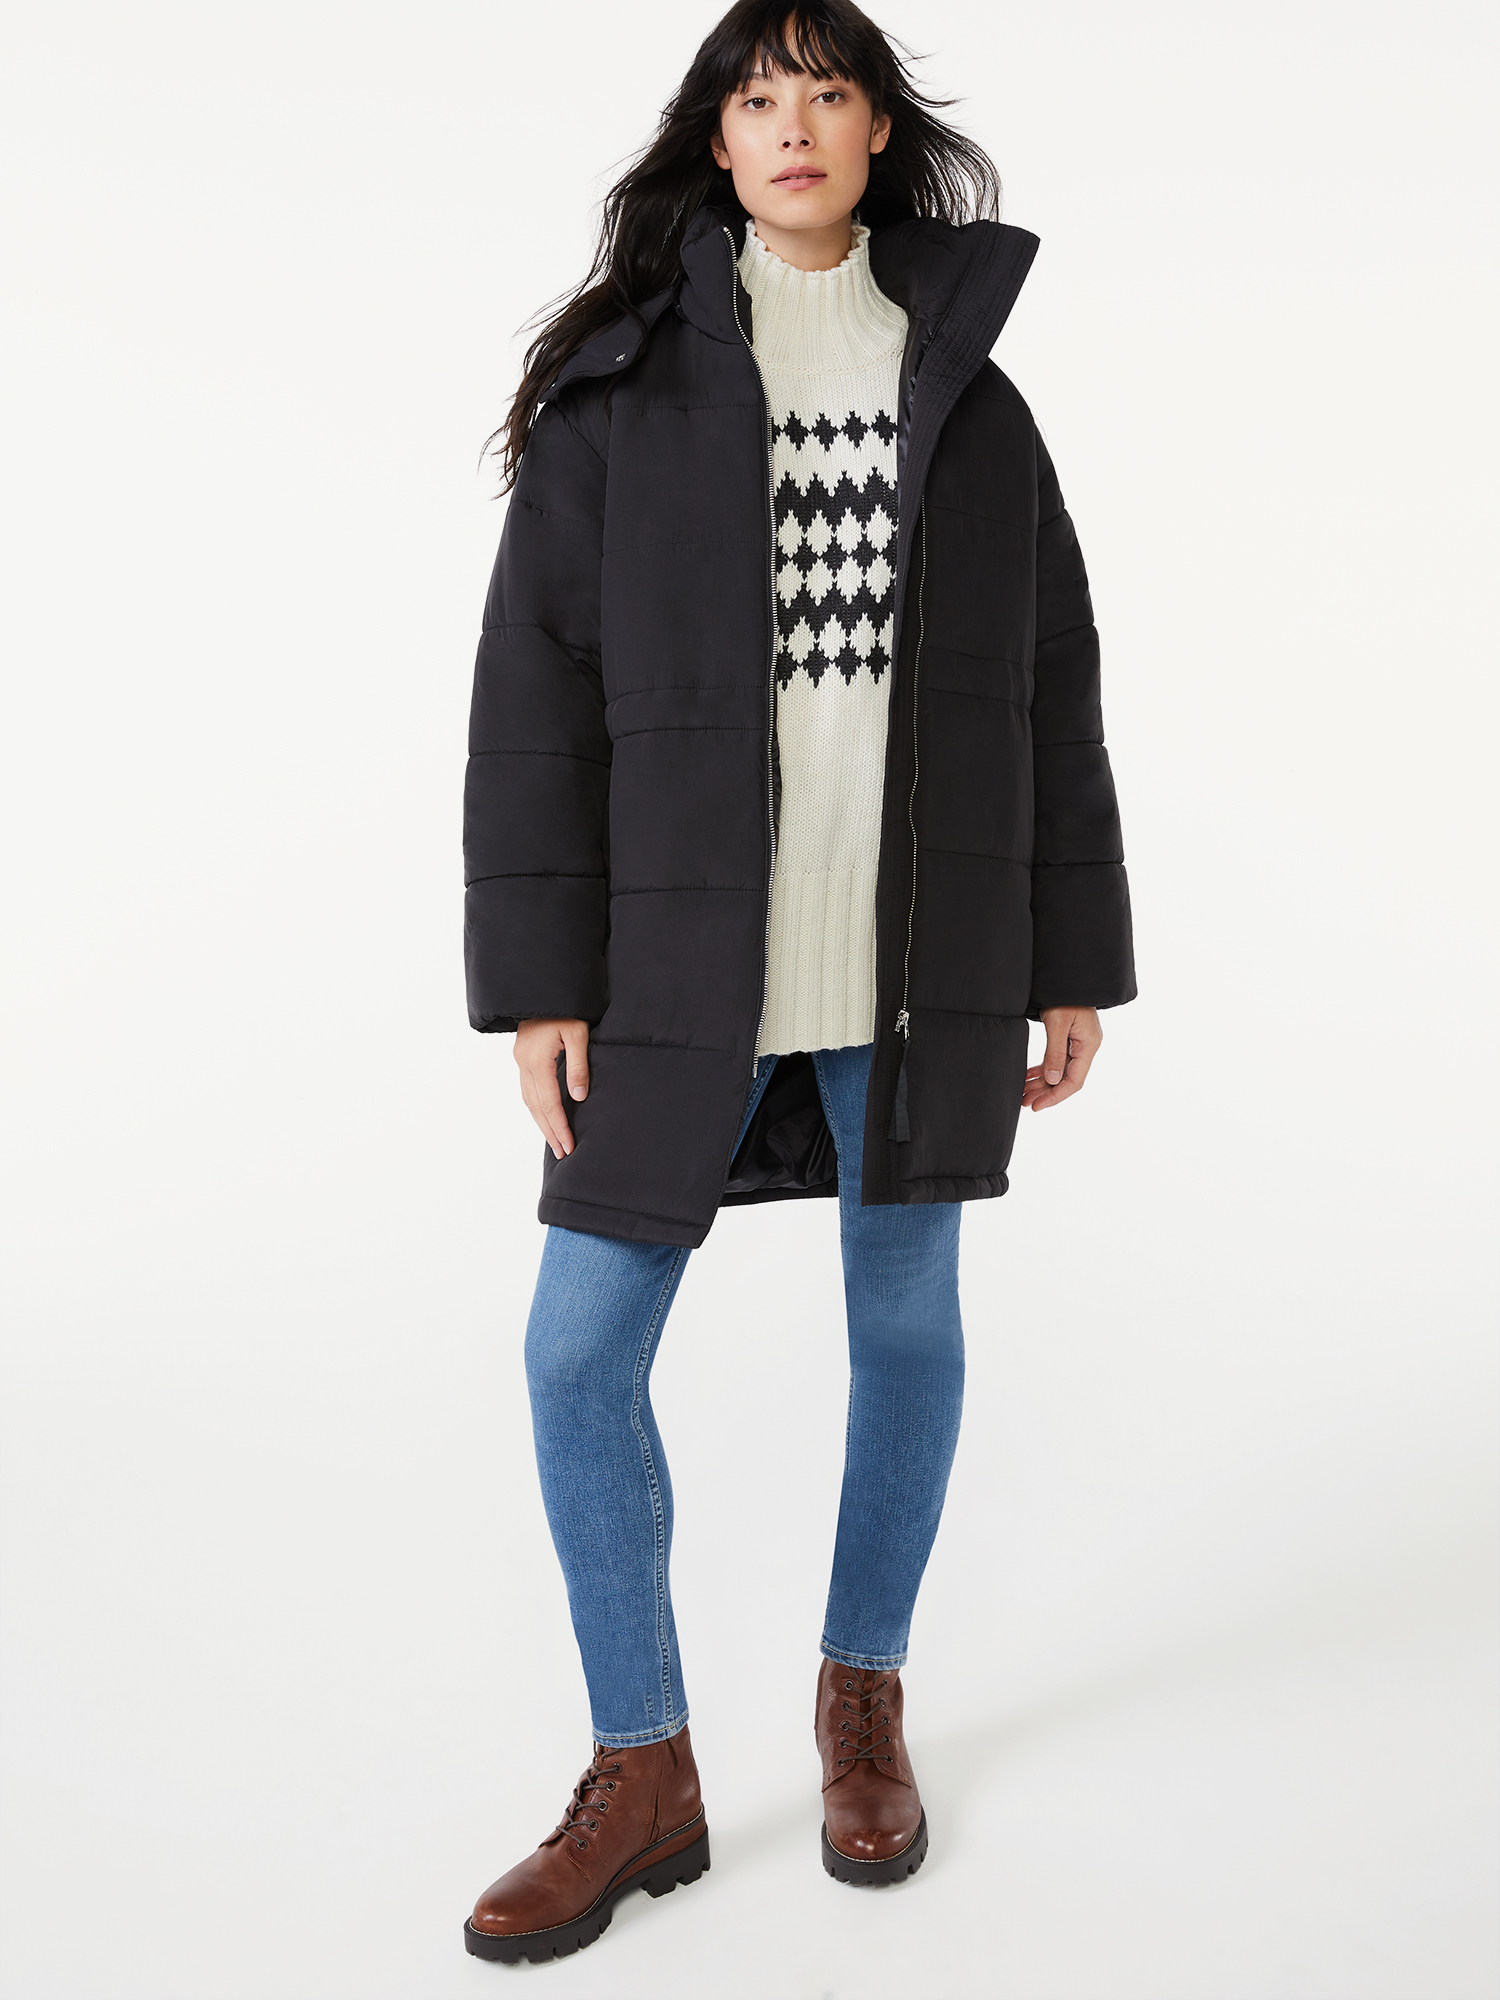 Free Assembly Women's Long Puffer Jacket, Midweight - image 2 of 5